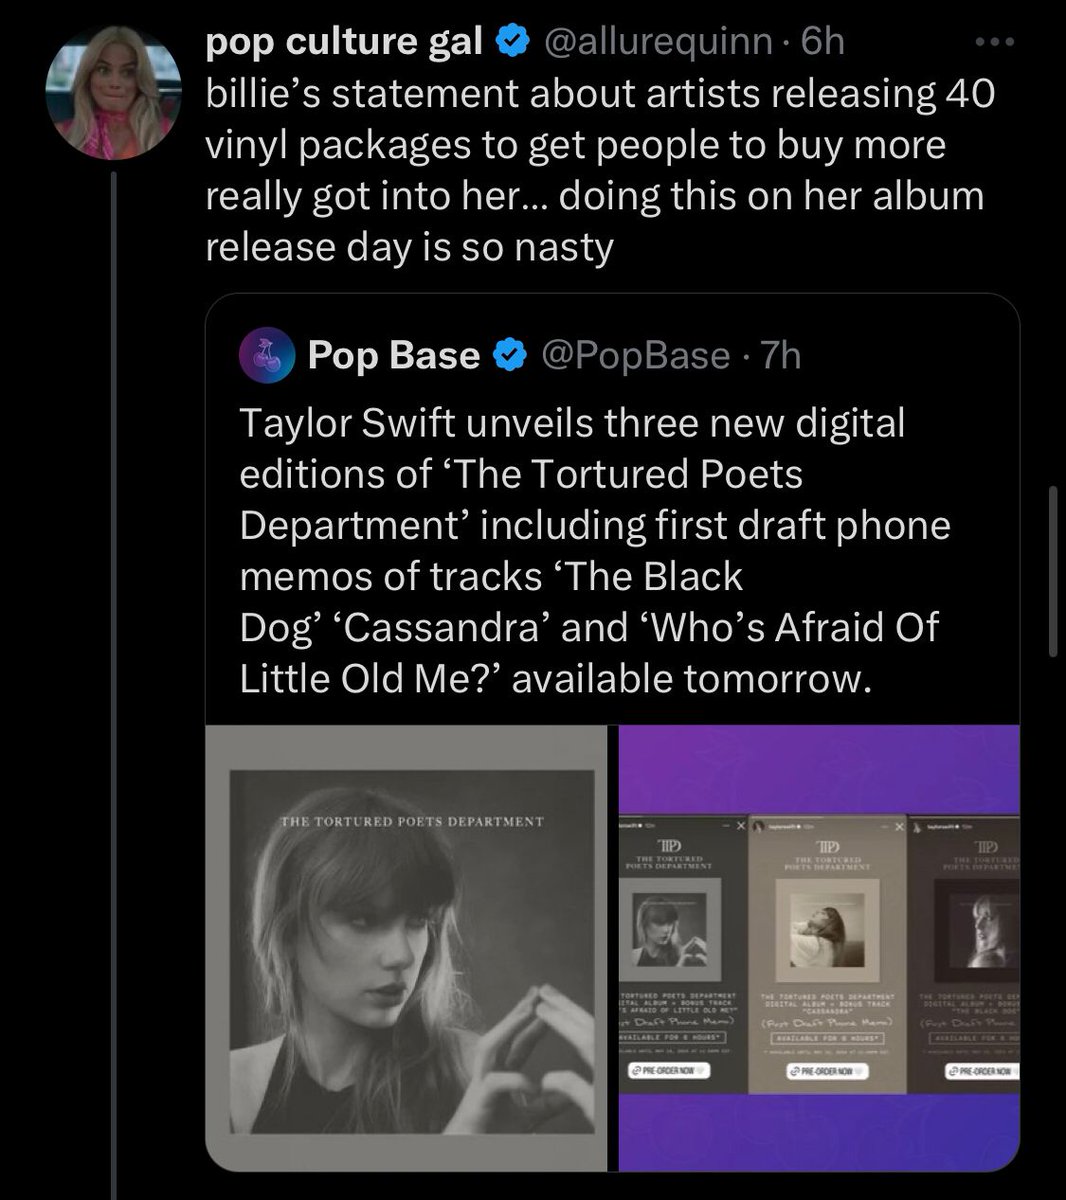 Stan being happy over Billie 'shading' Taylor while getting mad at Taylor for shading back - a thread.